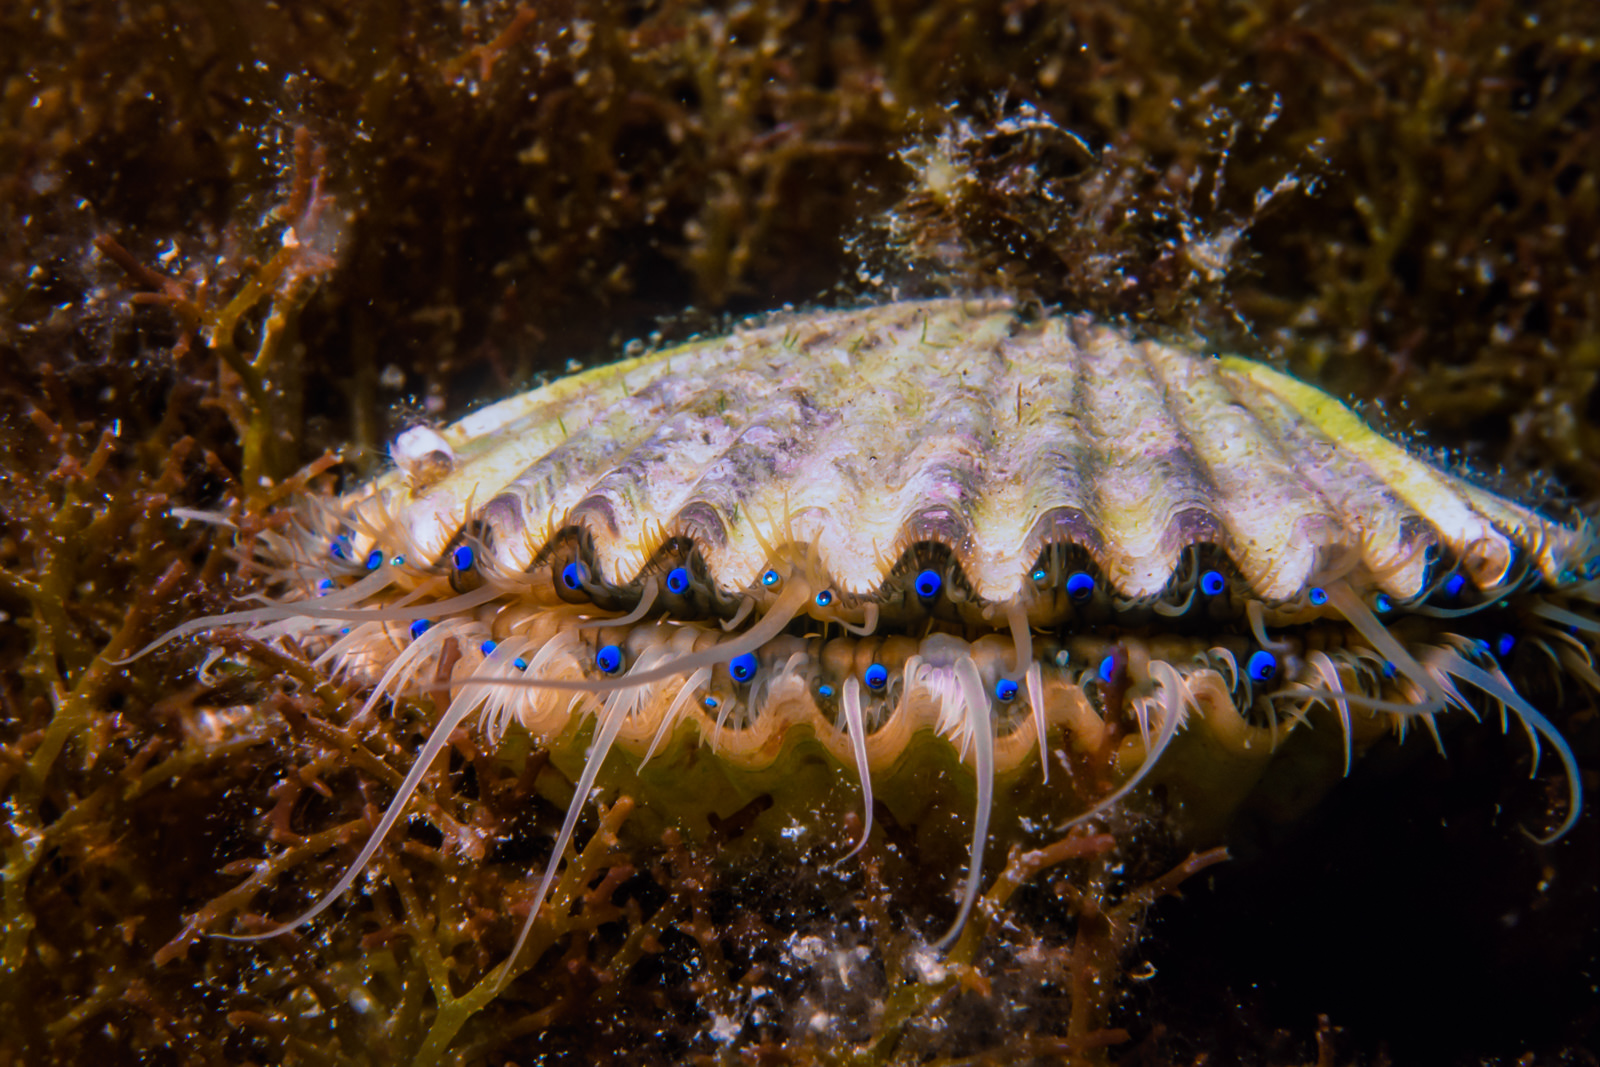 Close up view of bay scallop (Argopecten irradians) showing bright blue eye...